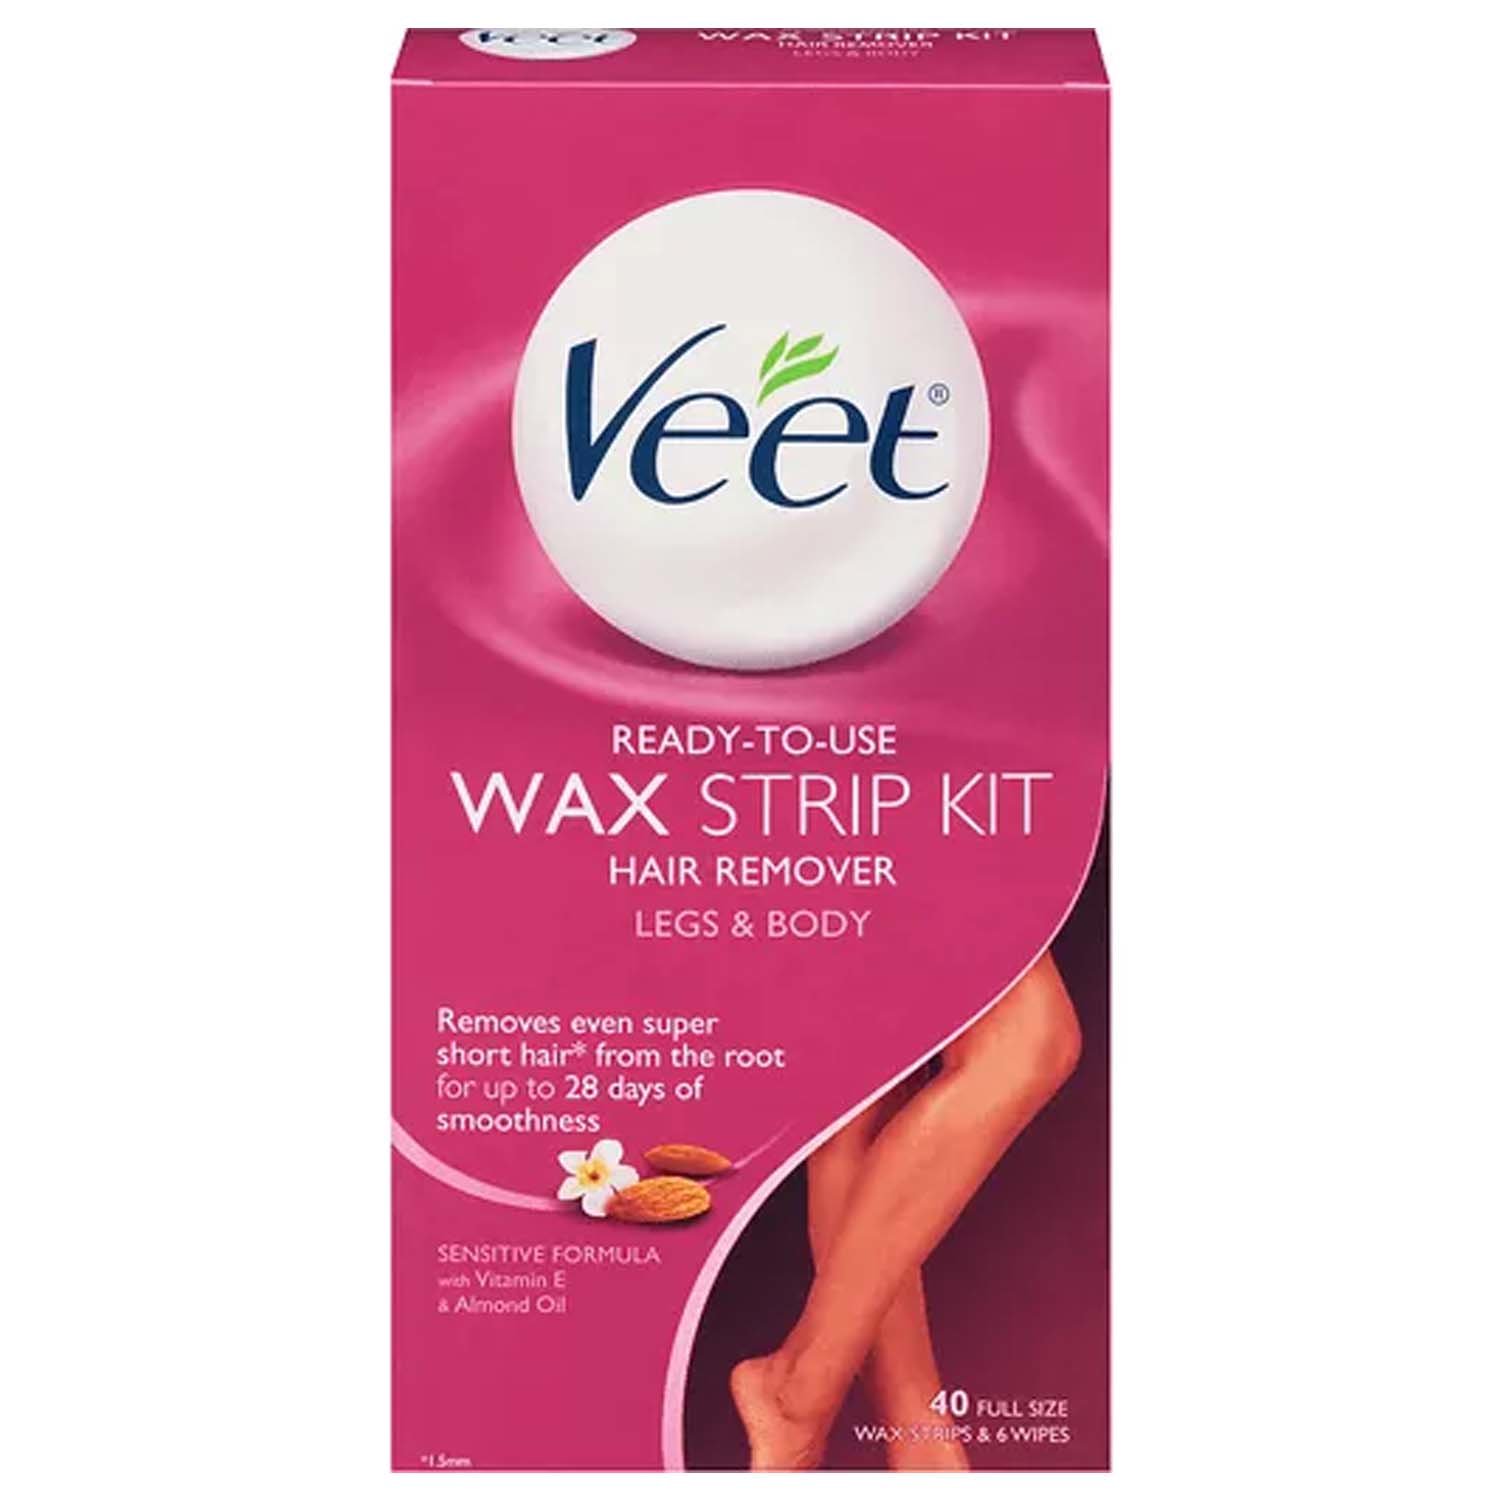 Veet Hair Removal, Ready-To-Use Wax Strip Kit (40 Count)